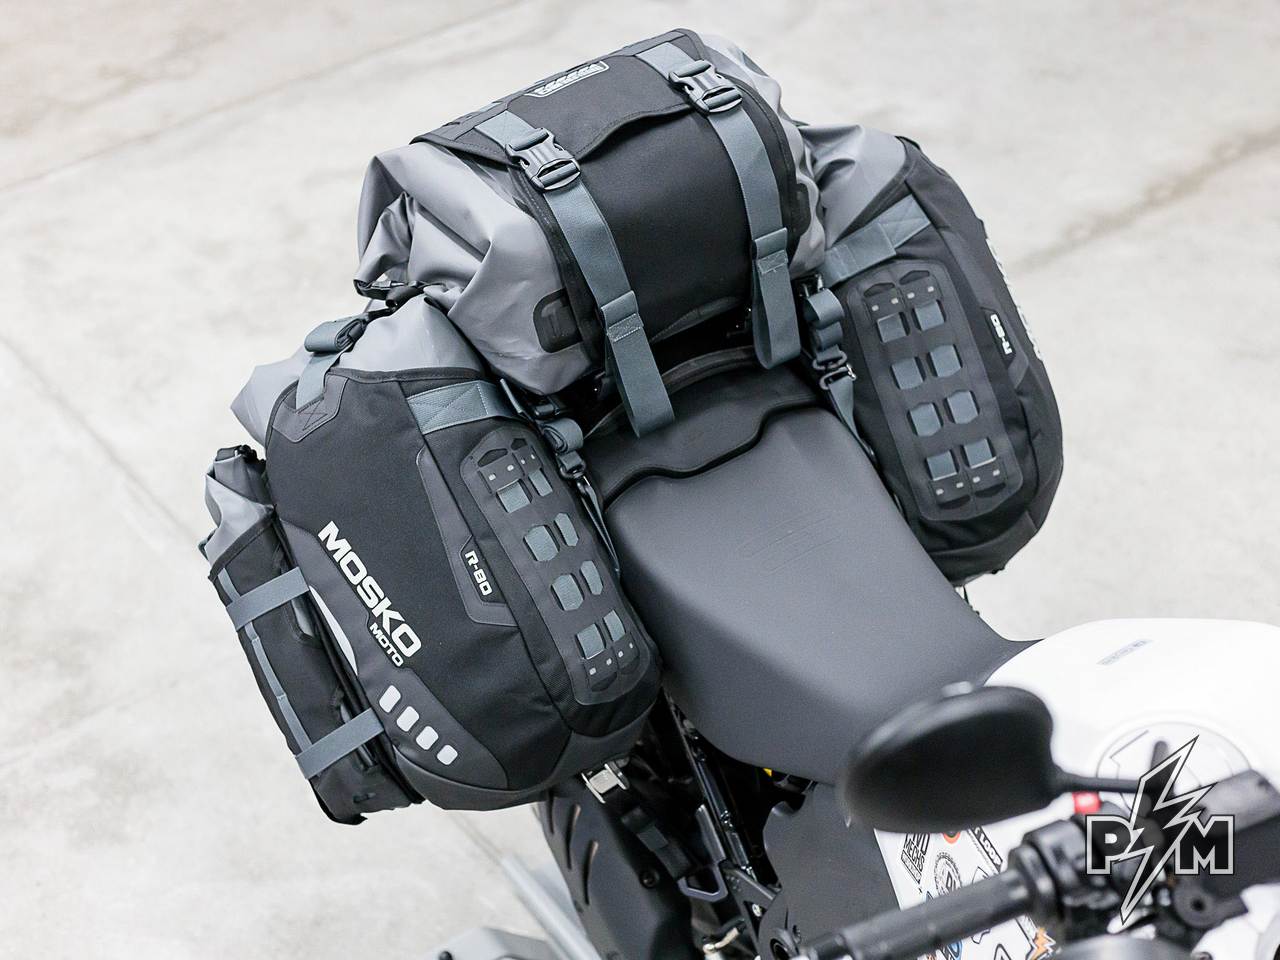 Perun moto Ducati Desertx Top luggage rack, Side carriers & Tie-down brackets with Mosko moto Reckless 80